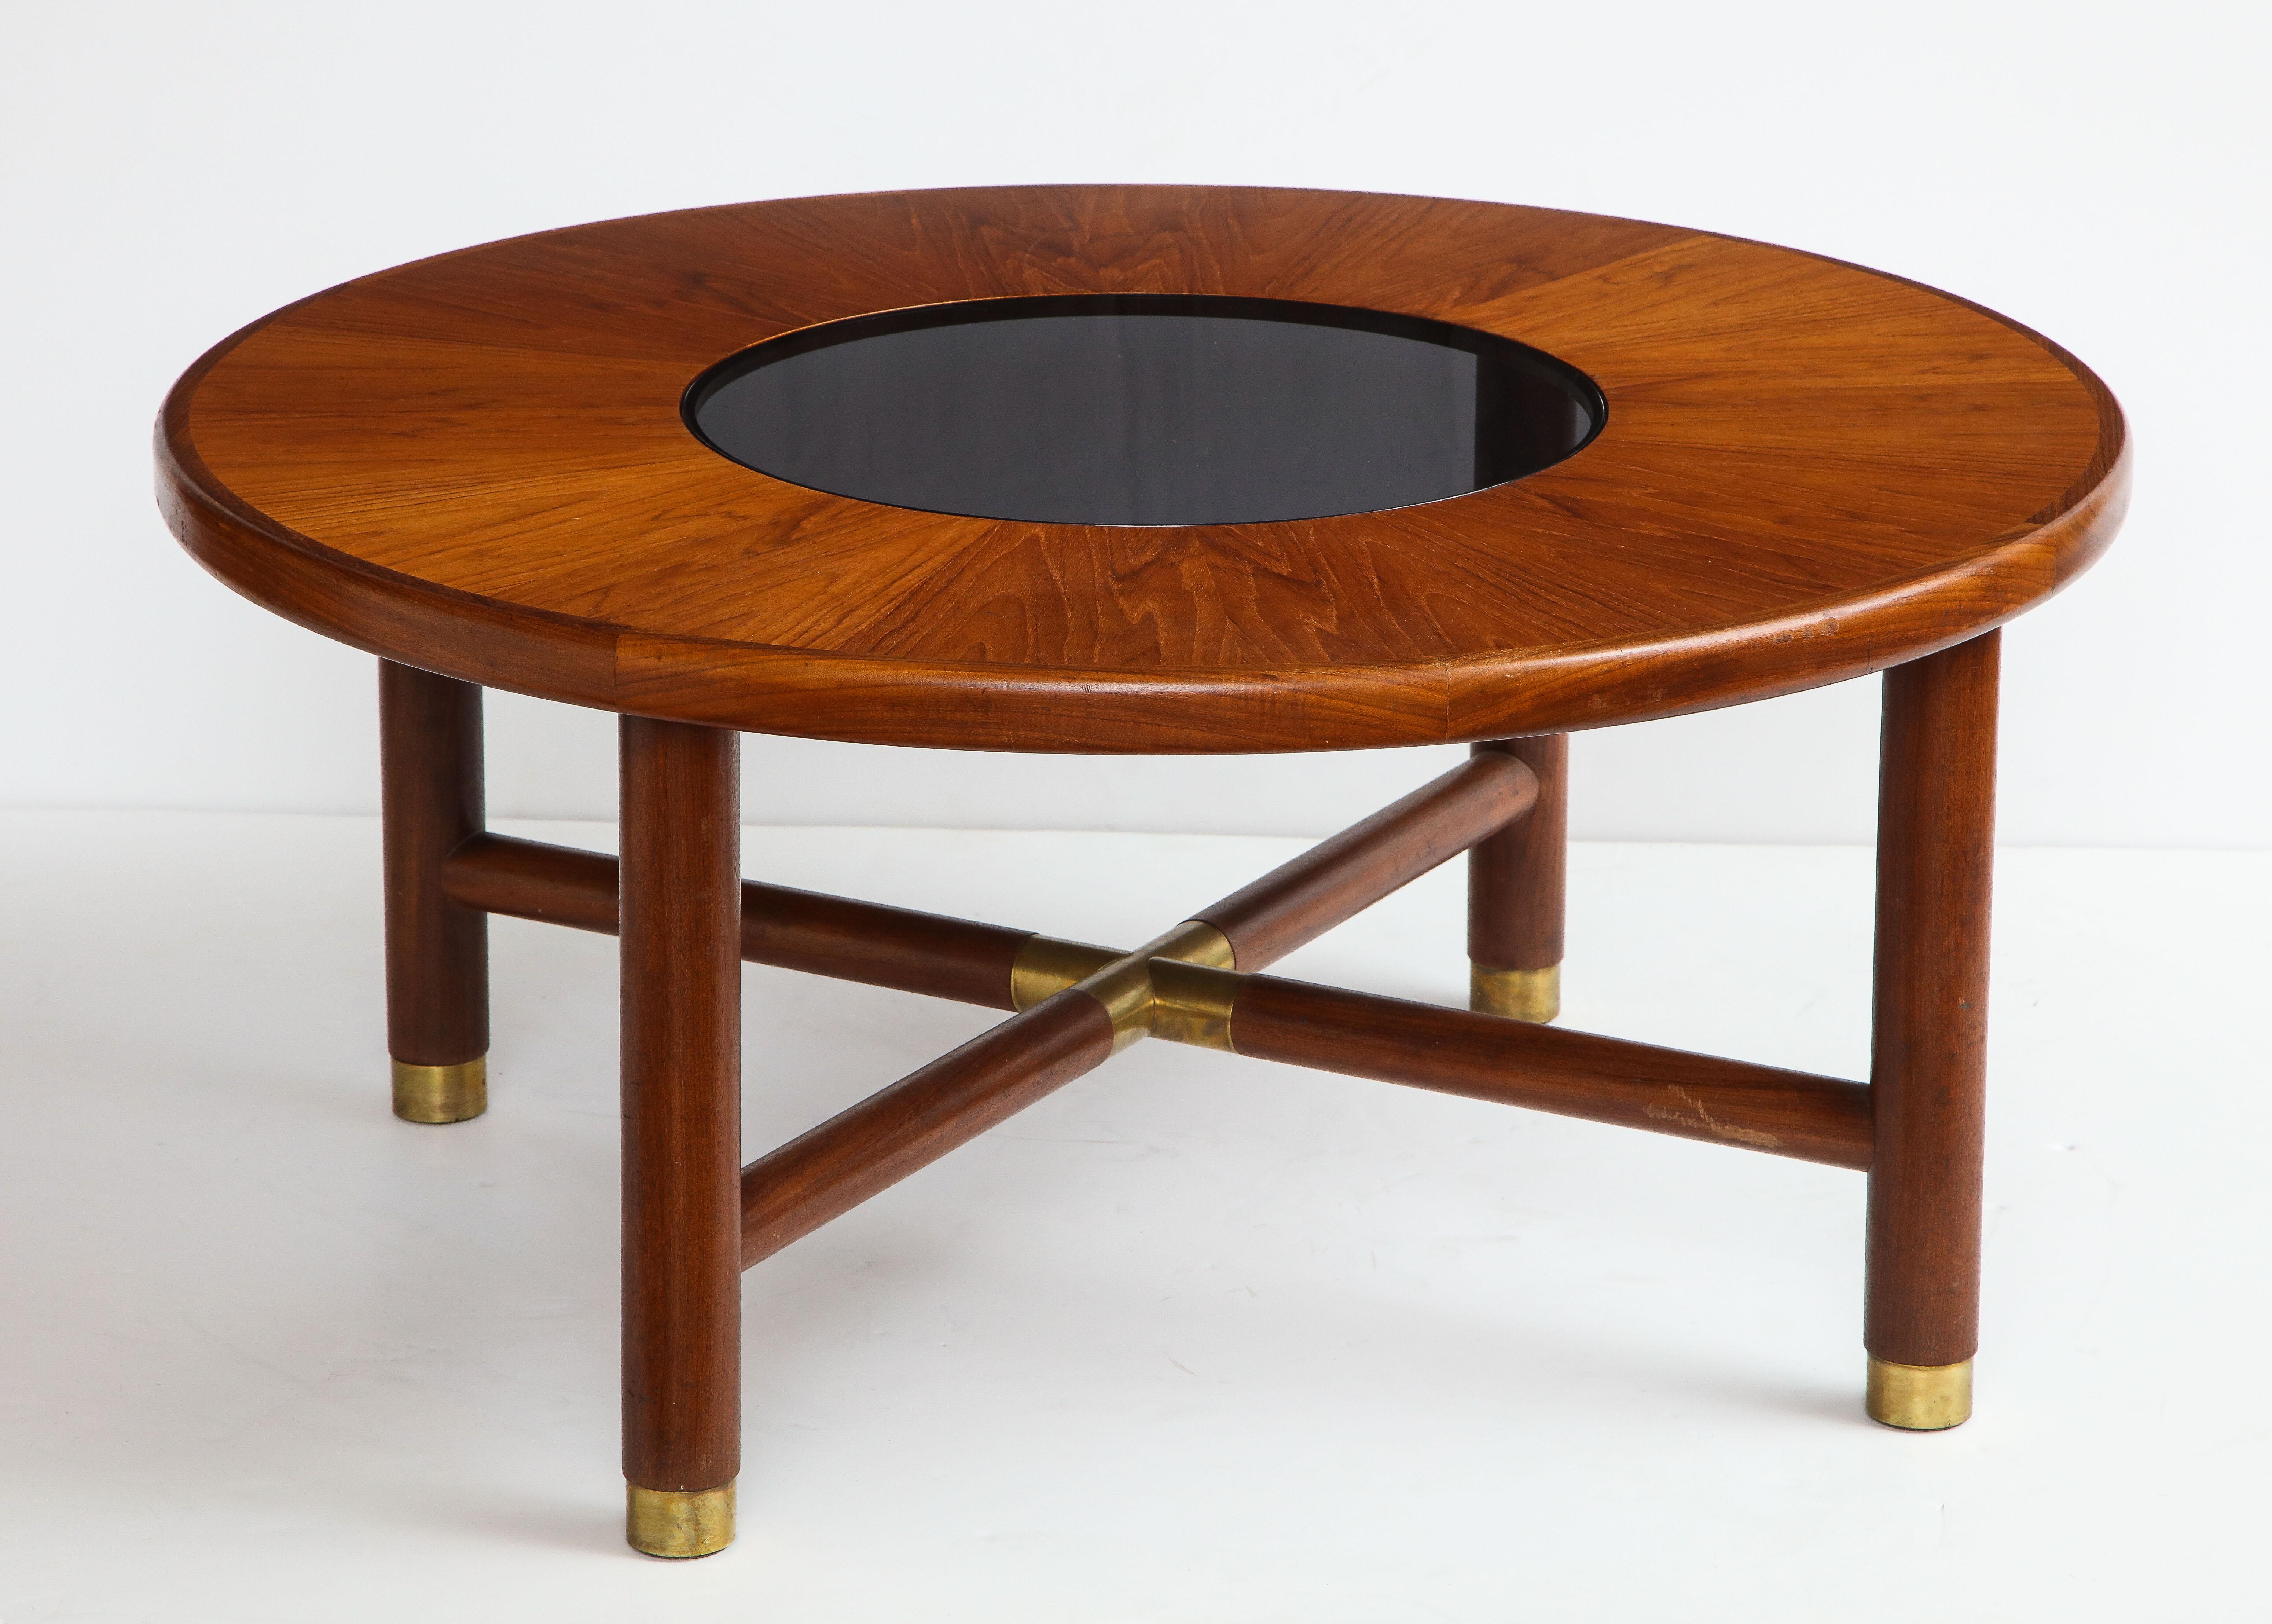 Mid-Century Modern Midcentury Round Teak and Smoked Glass Coffee Table by G-Plan, U.K. 1960s For Sale